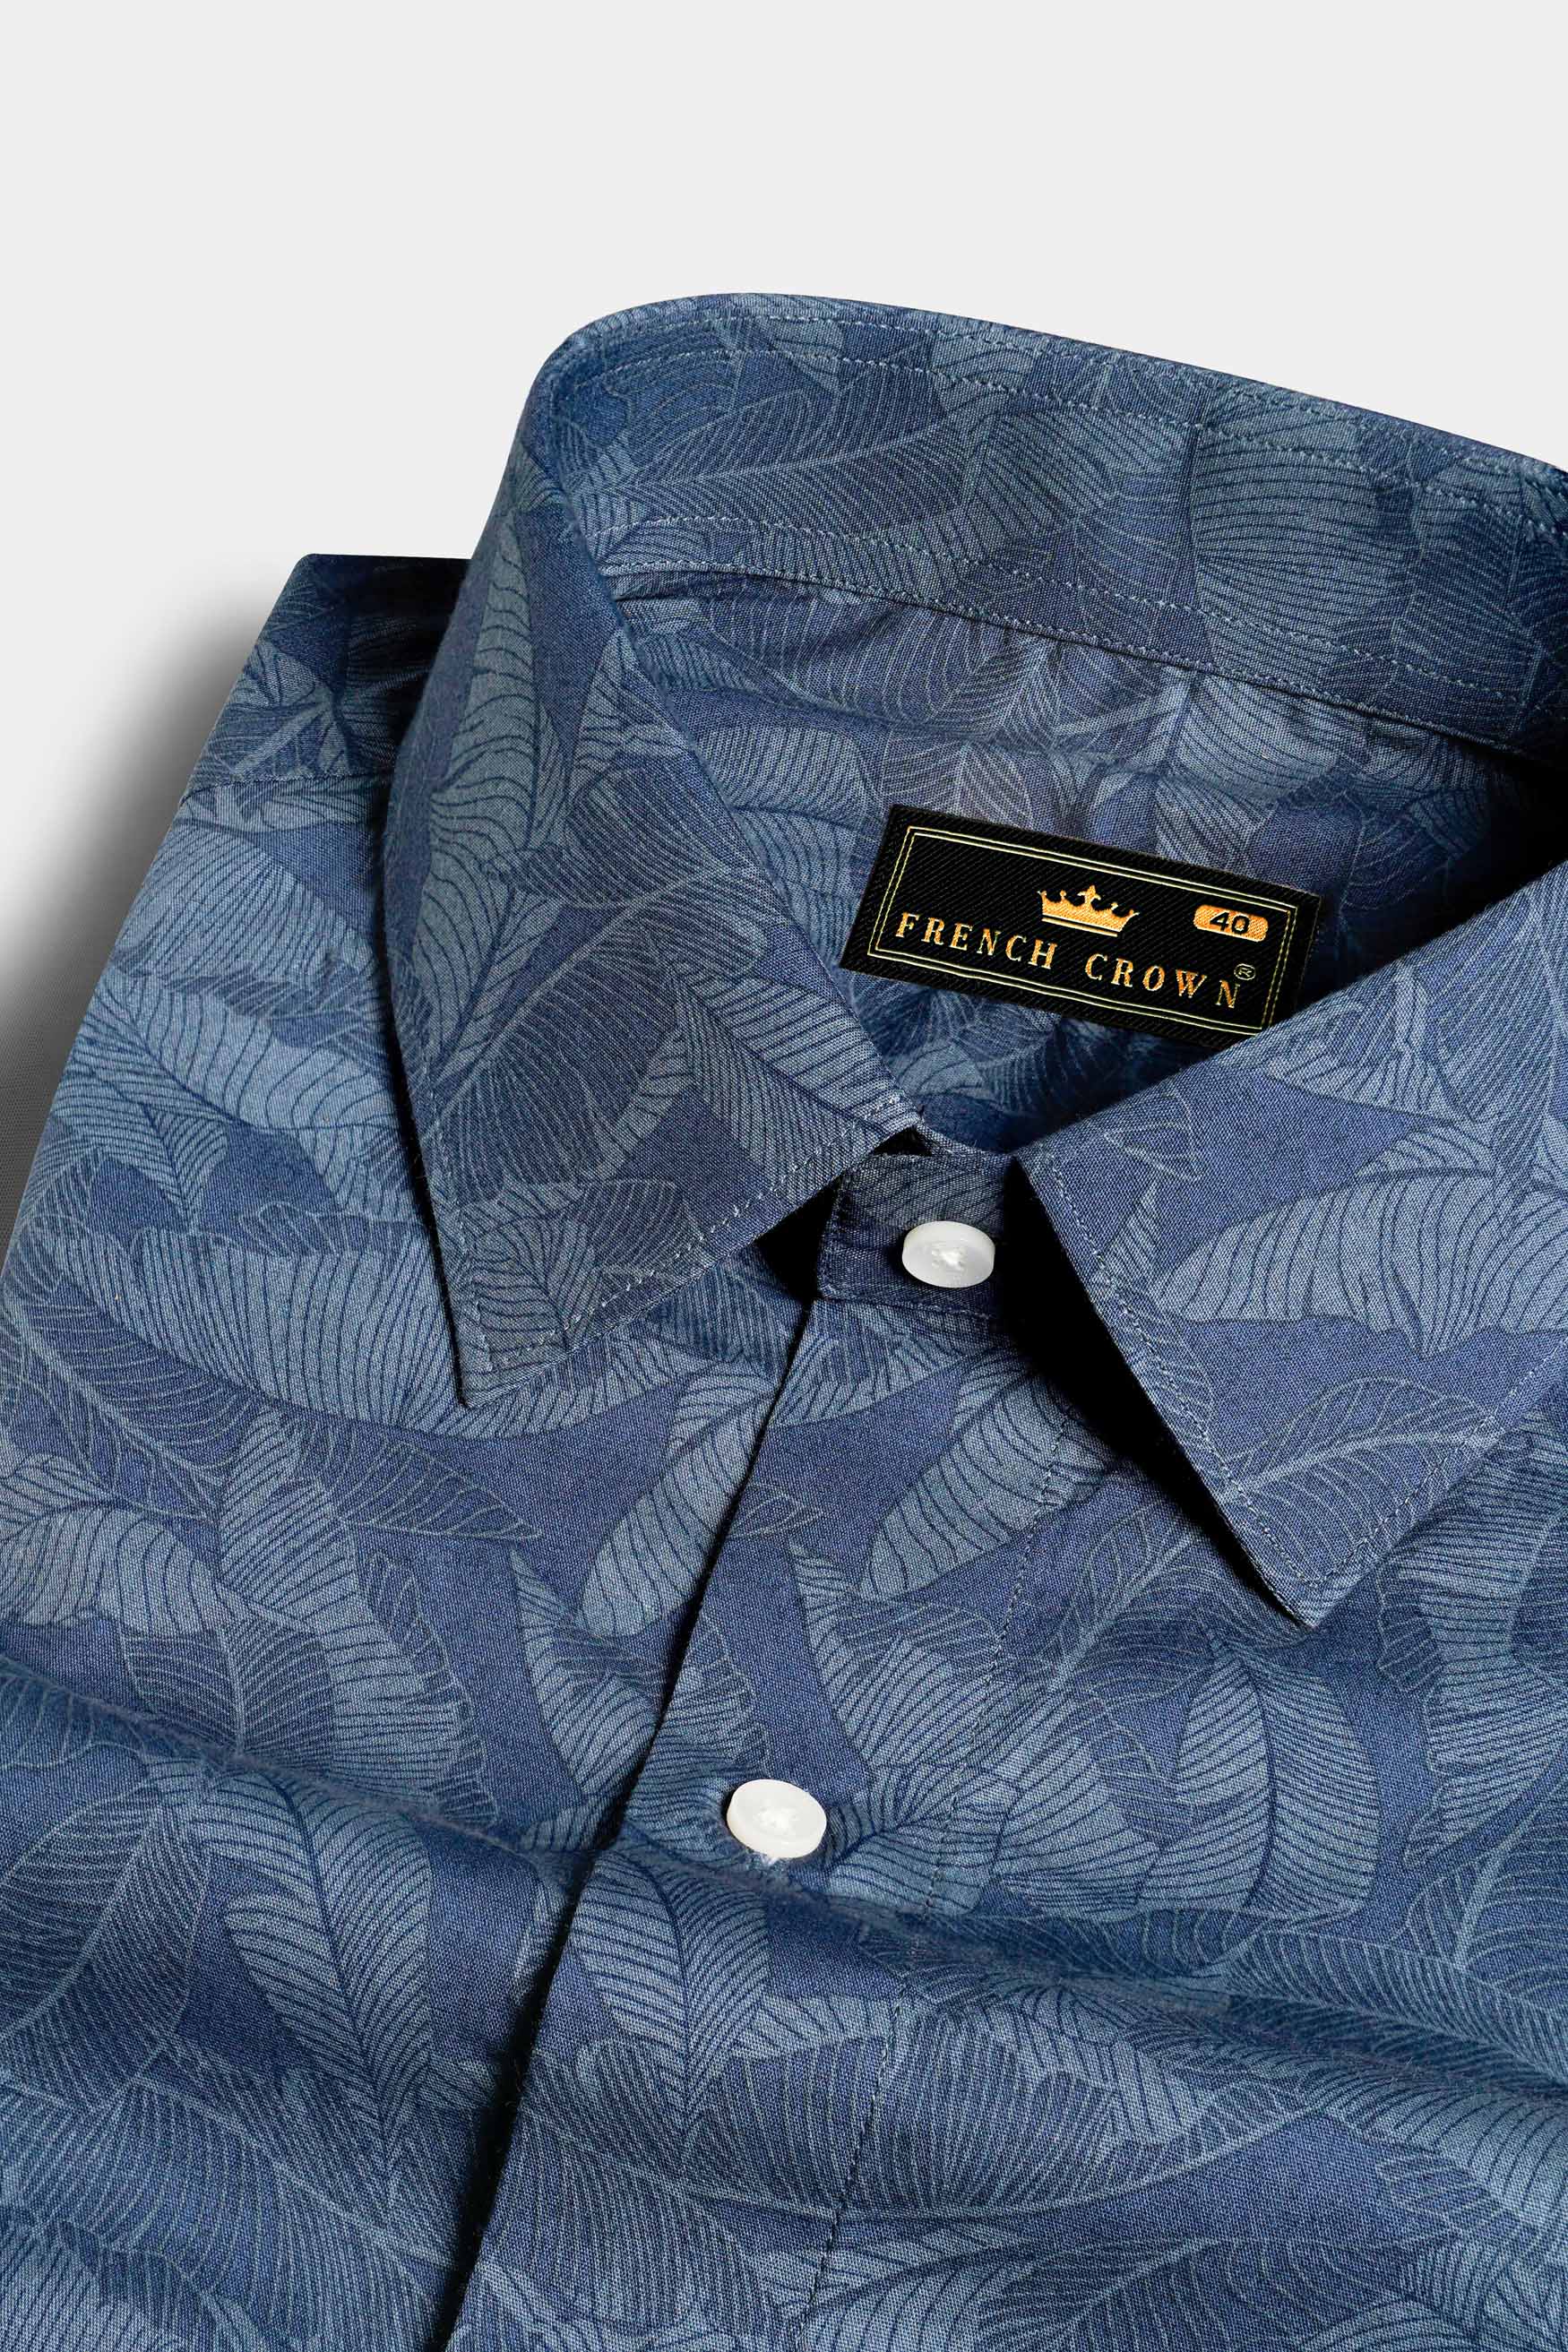 Slate Blue and Heather Gray Leaves Printed Premium Cotton Shirt 11458-38, 11458-H-38, 11458-39, 11458-H-39, 11458-40, 11458-H-40, 11458-42, 11458-H-42, 11458-44, 11458-H-44, 11458-46, 11458-H-46, 11458-48, 11458-H-48, 11458-50, 11458-H-50, 11458-52, 11458-H-52